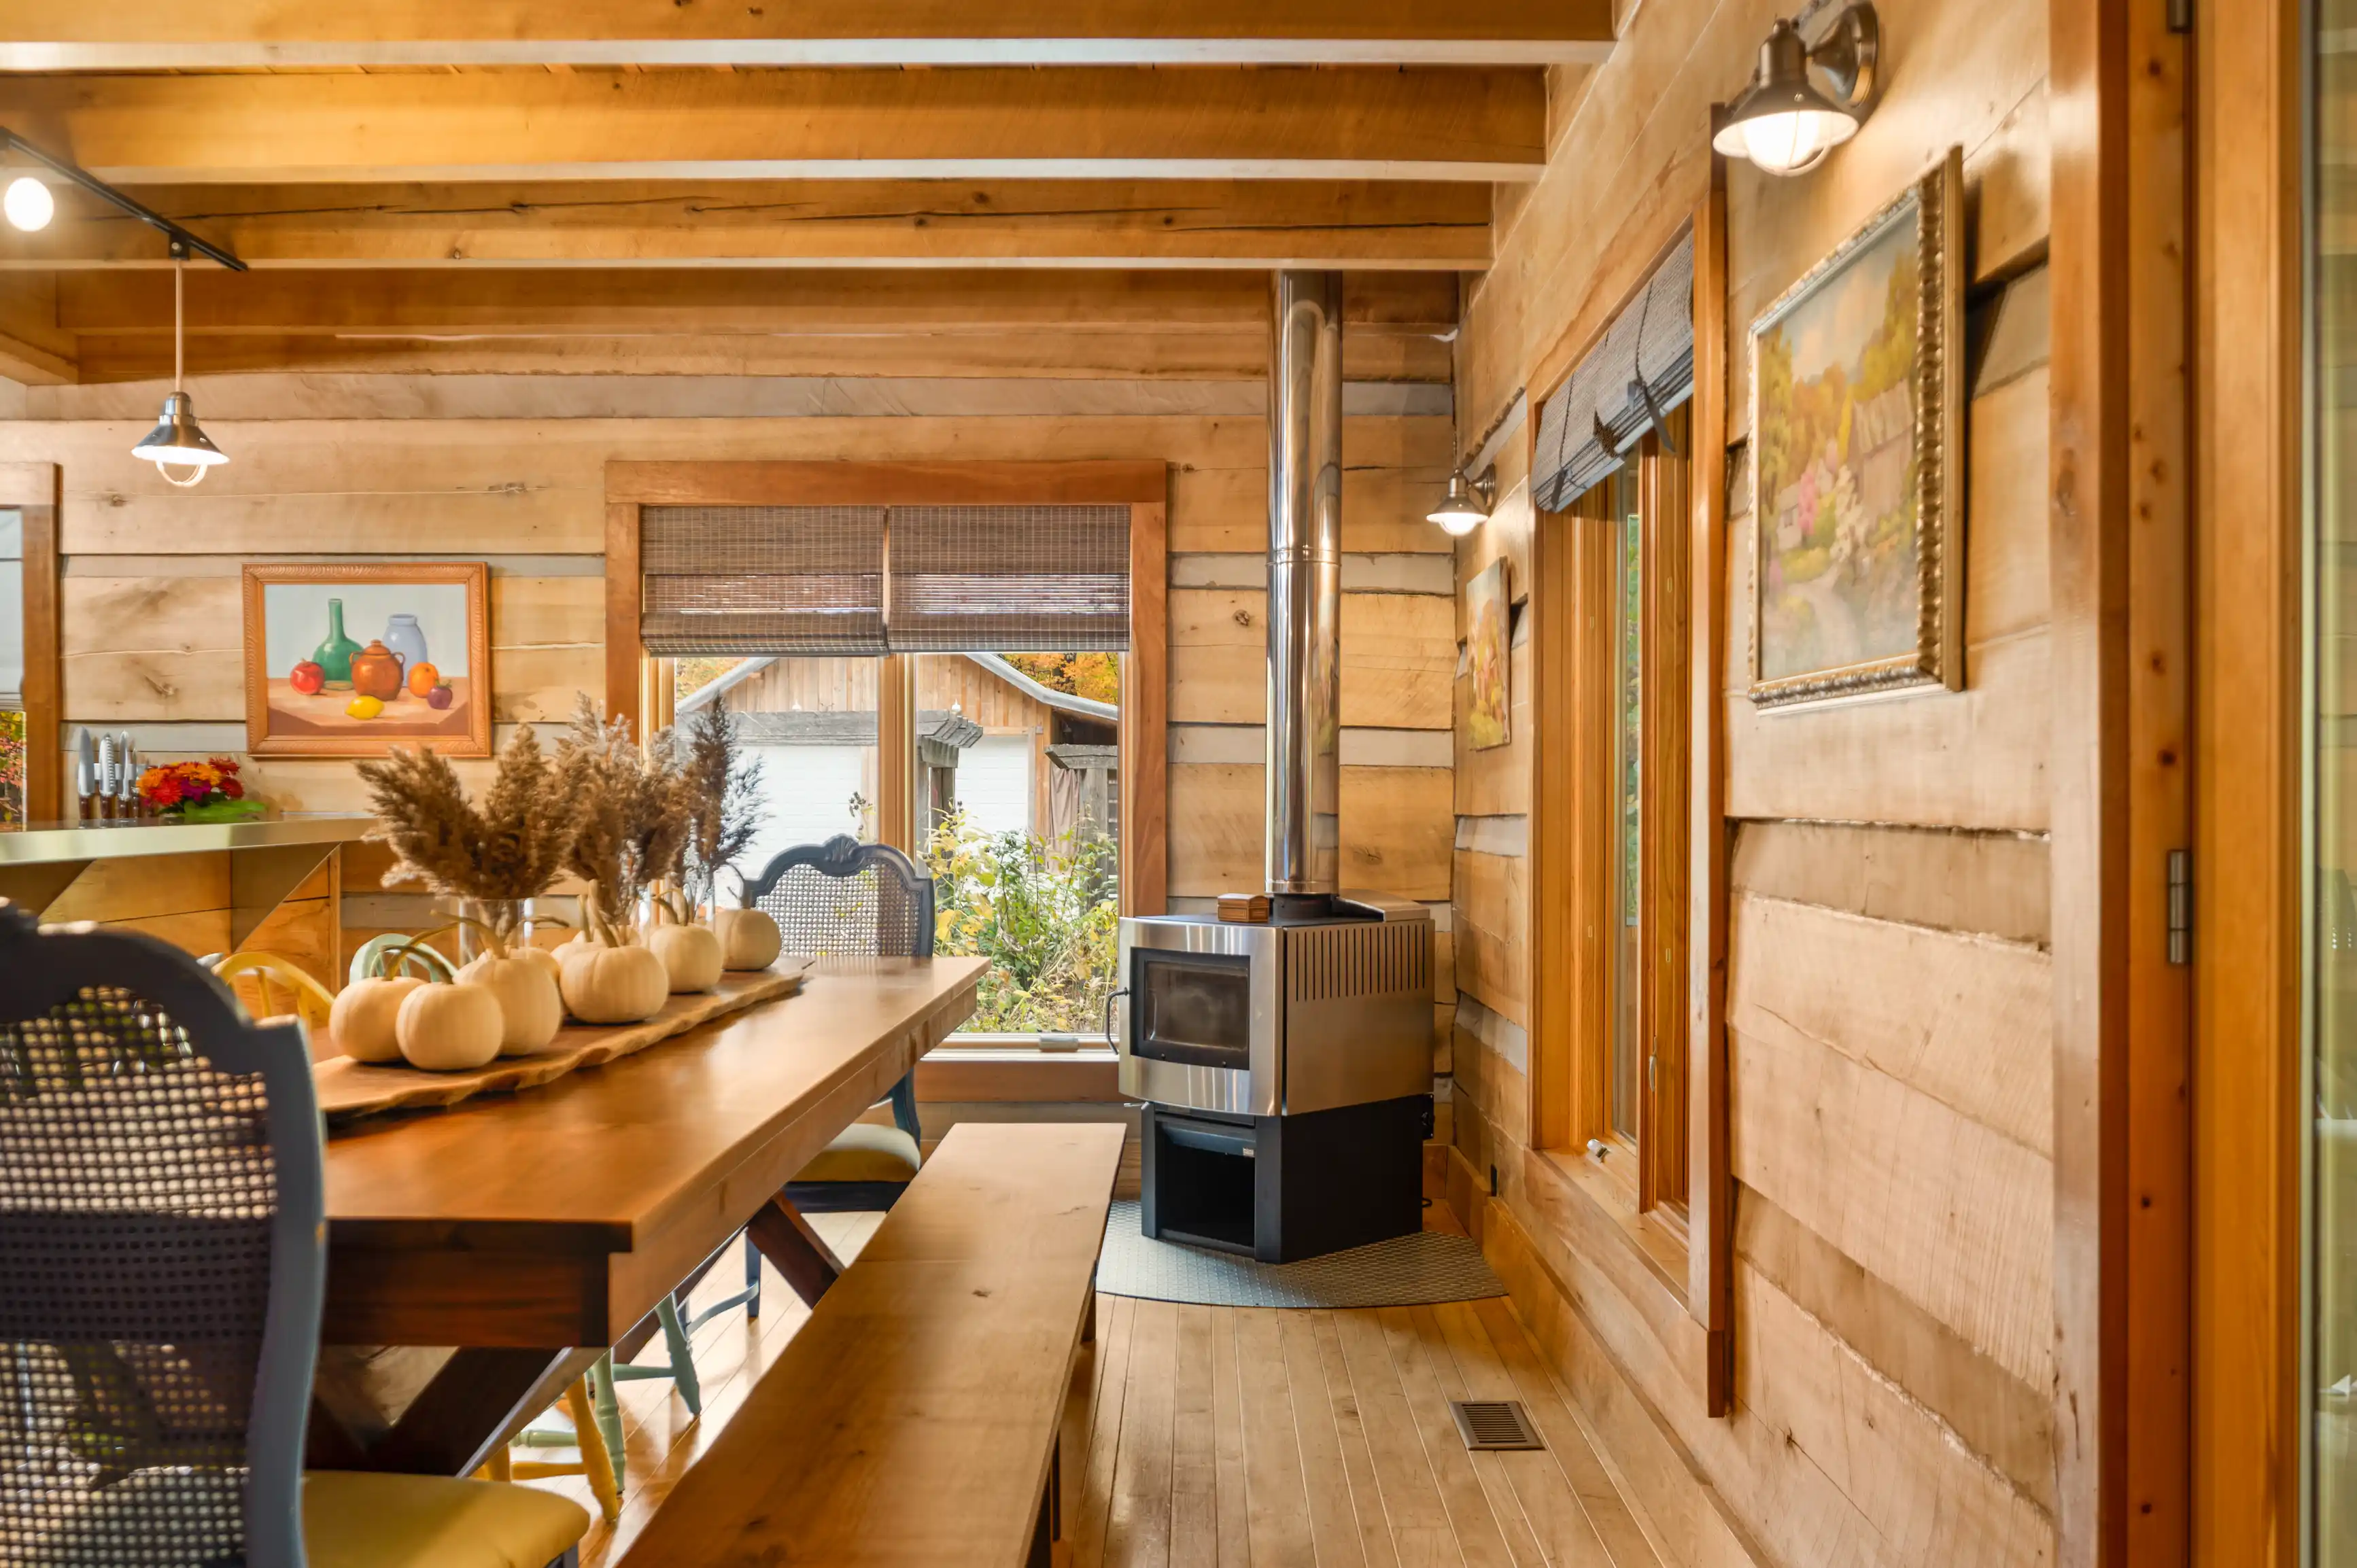 Cozy wooden cabin interior with a long dining table adorned with pumpkins, a wood stove, framed art on walls, and a view of the outdoors through windows.